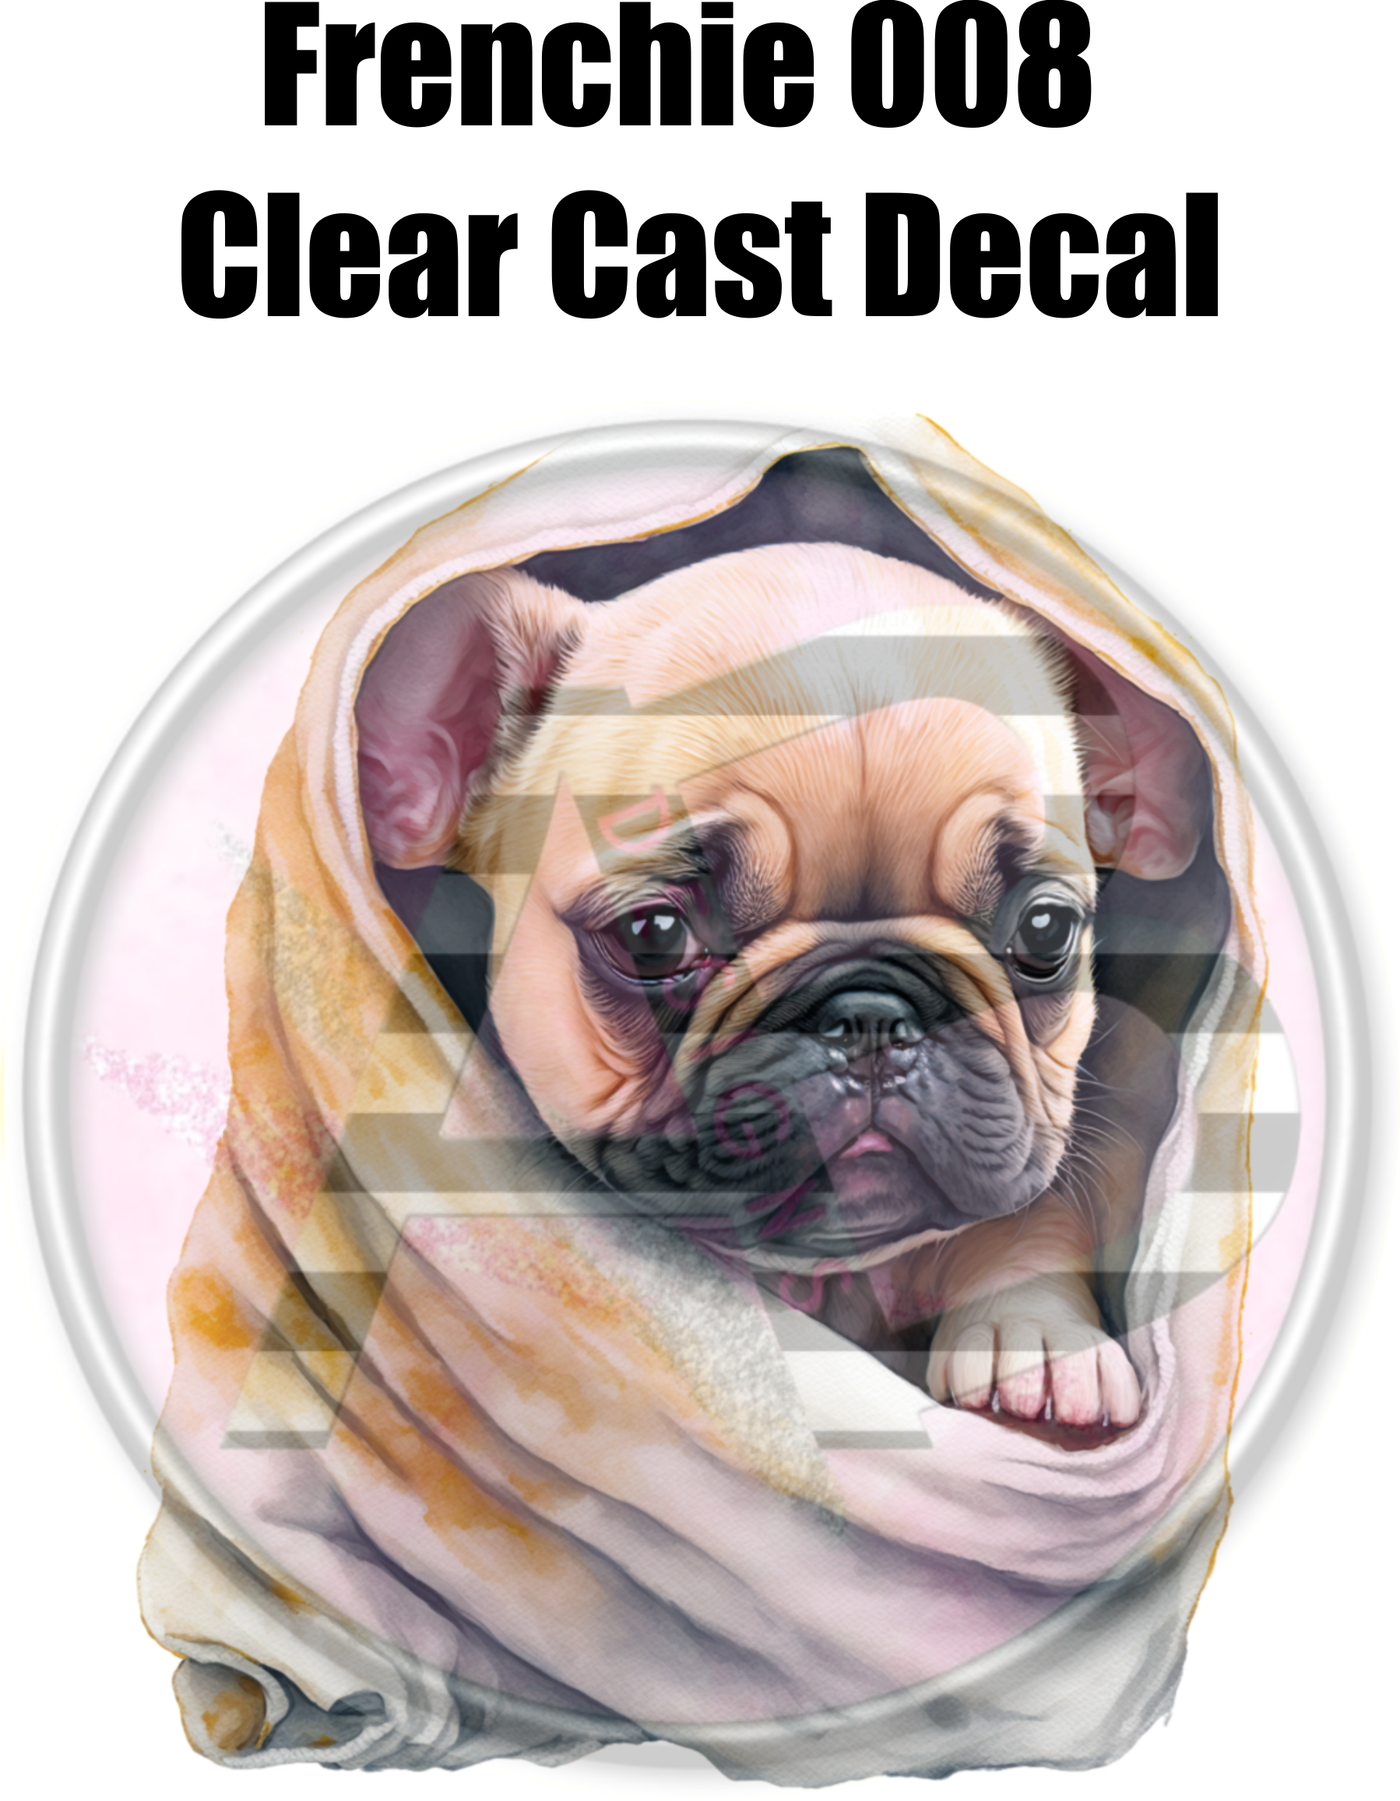 Frenchie 008 - Clear Cast Decal